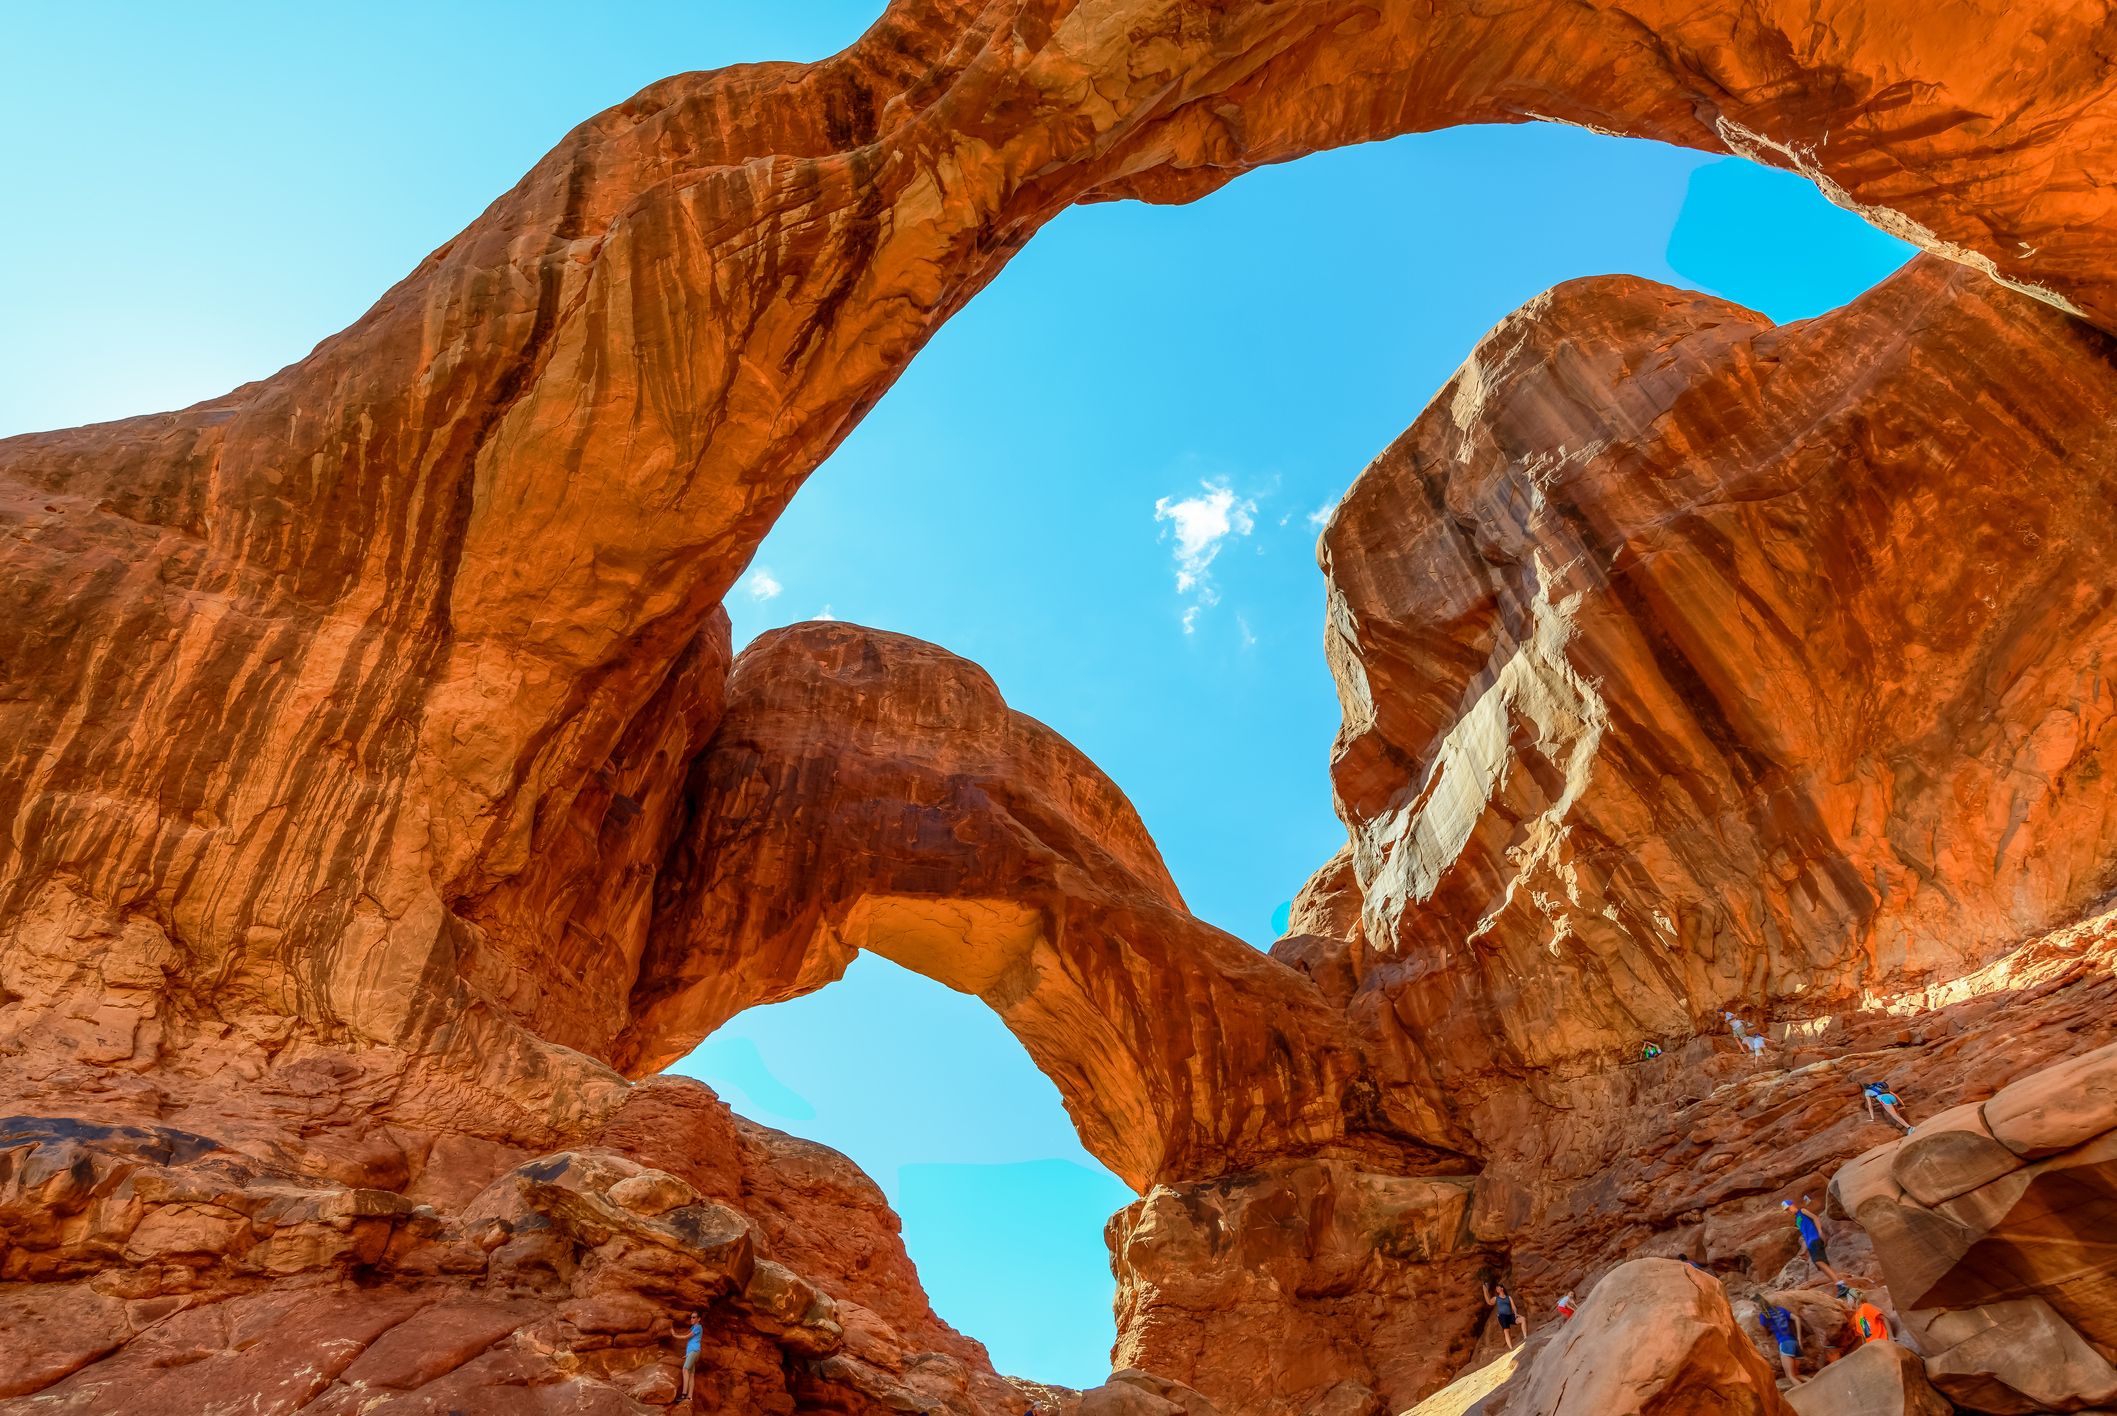 https://hips.hearstapps.com/hmg-prod/images/tourists-explore-double-arch-arches-national-park-royalty-free-image-1678764079.jpg